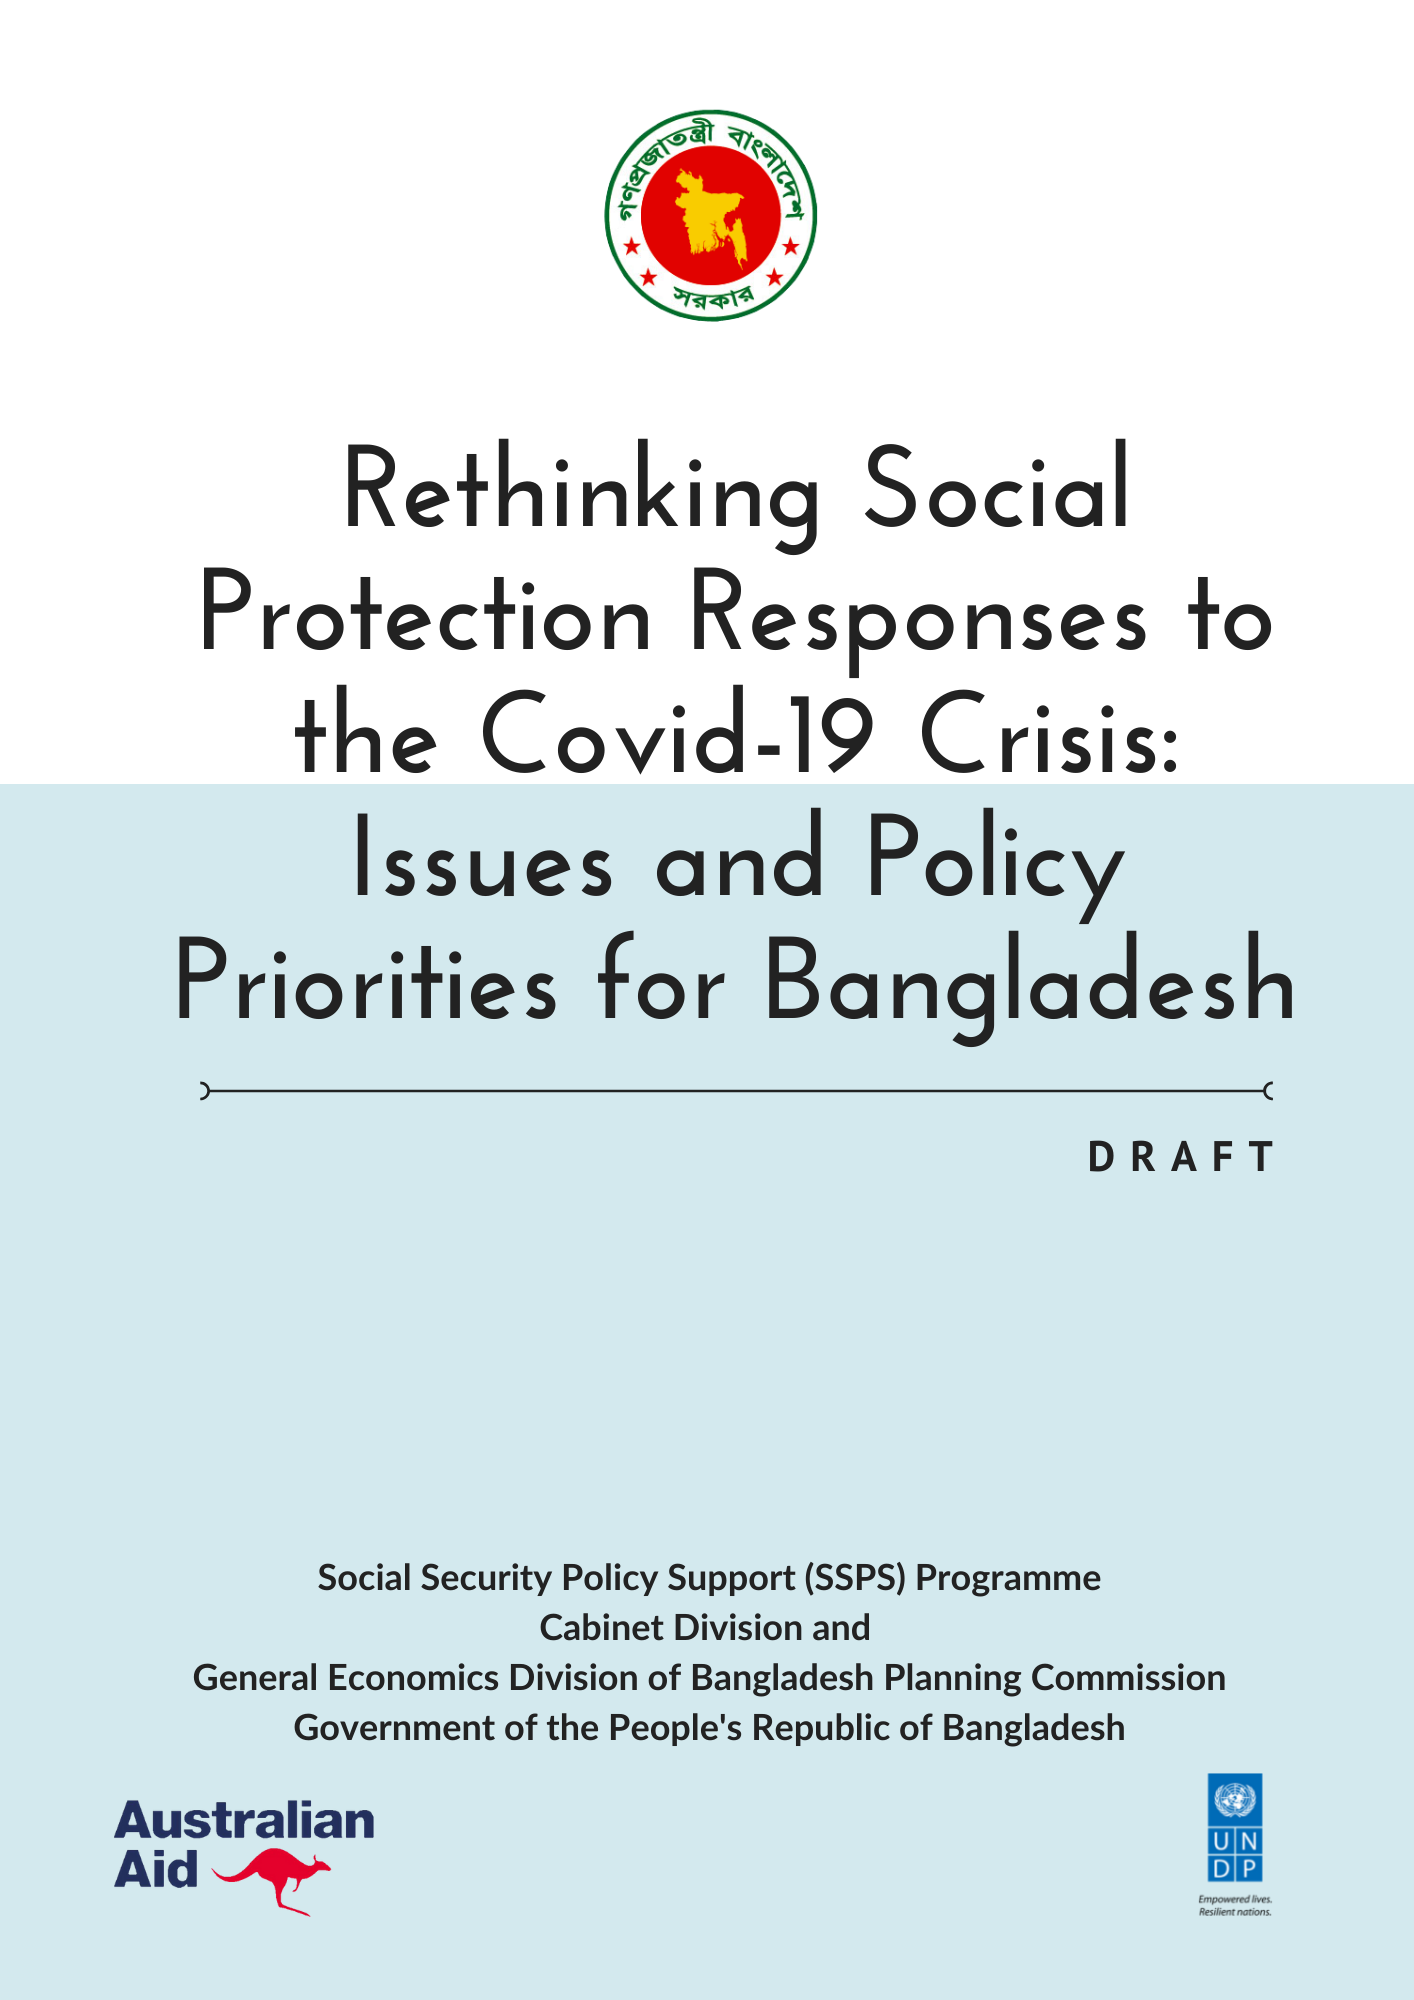 Rethinking Social Protection Responses to the Covid-19 Crisis: Issues and Policy Priorities for Bangladesh